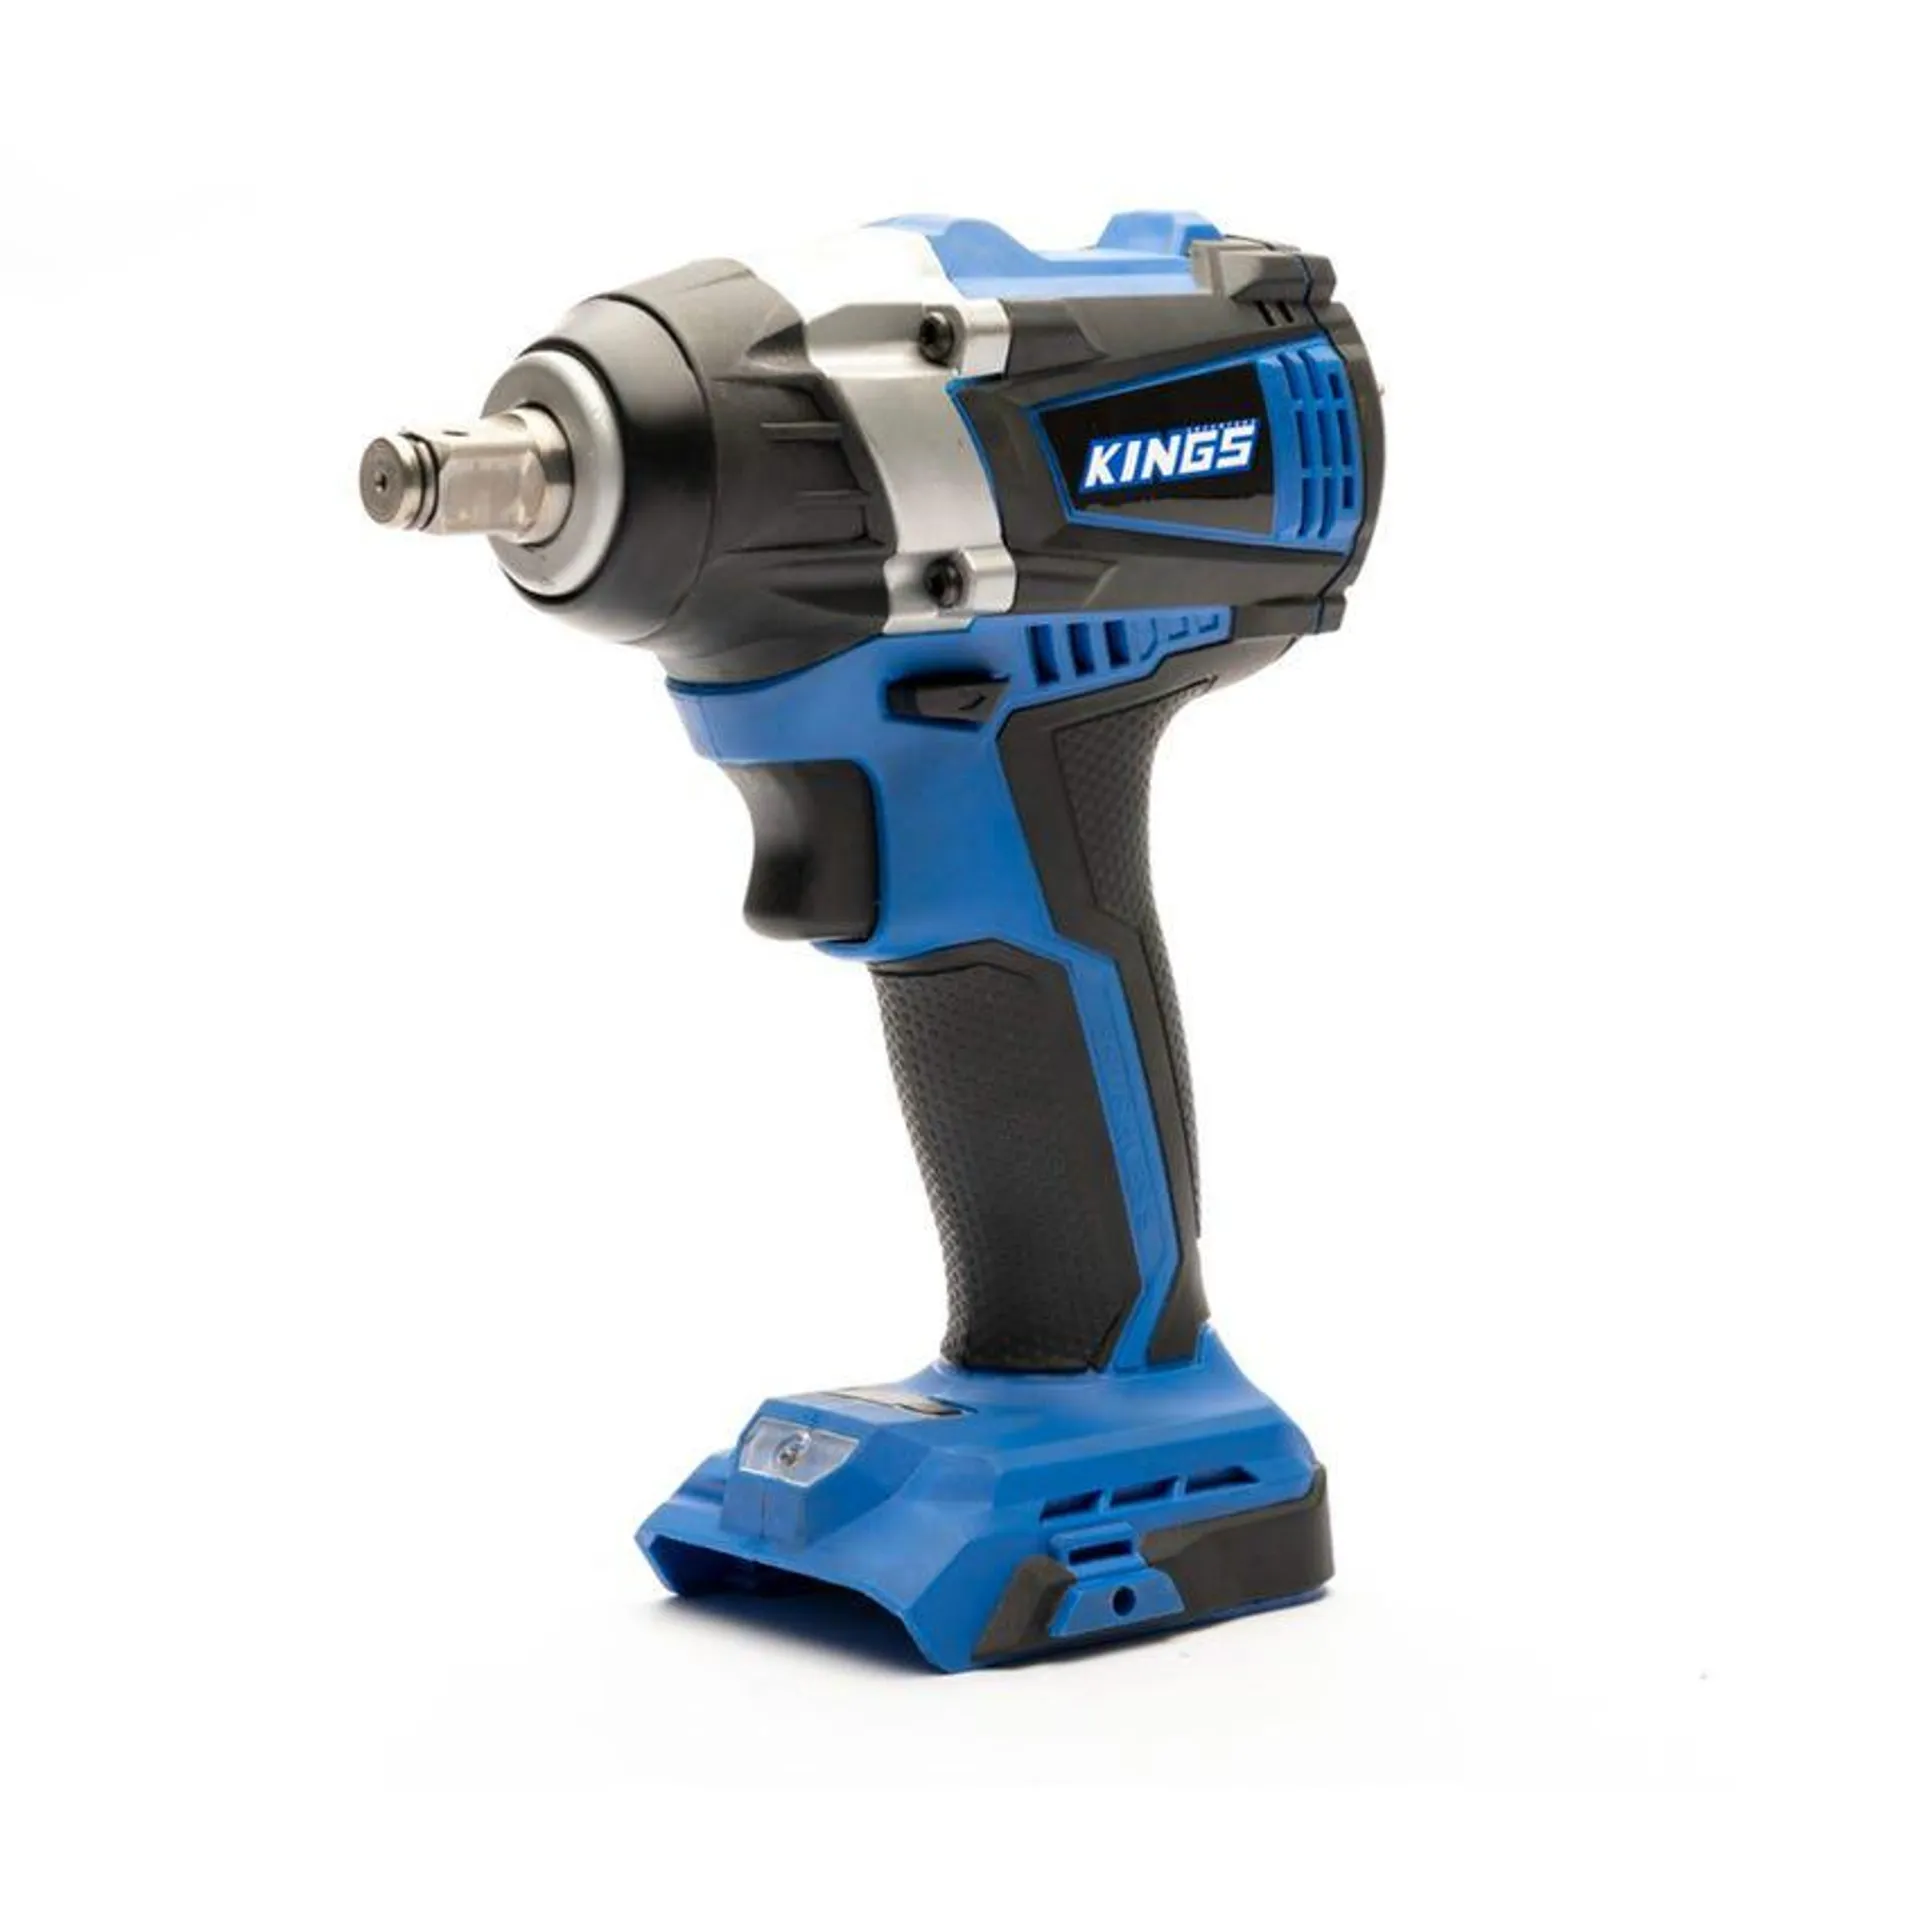 Kings 20V Brushless Impact Wrench | Up to 300Nm Torque | Up to 3780 Impacts Per Minute | Brushless Motor | Heavy-Duty 1/2inch Drive with Friction Ring